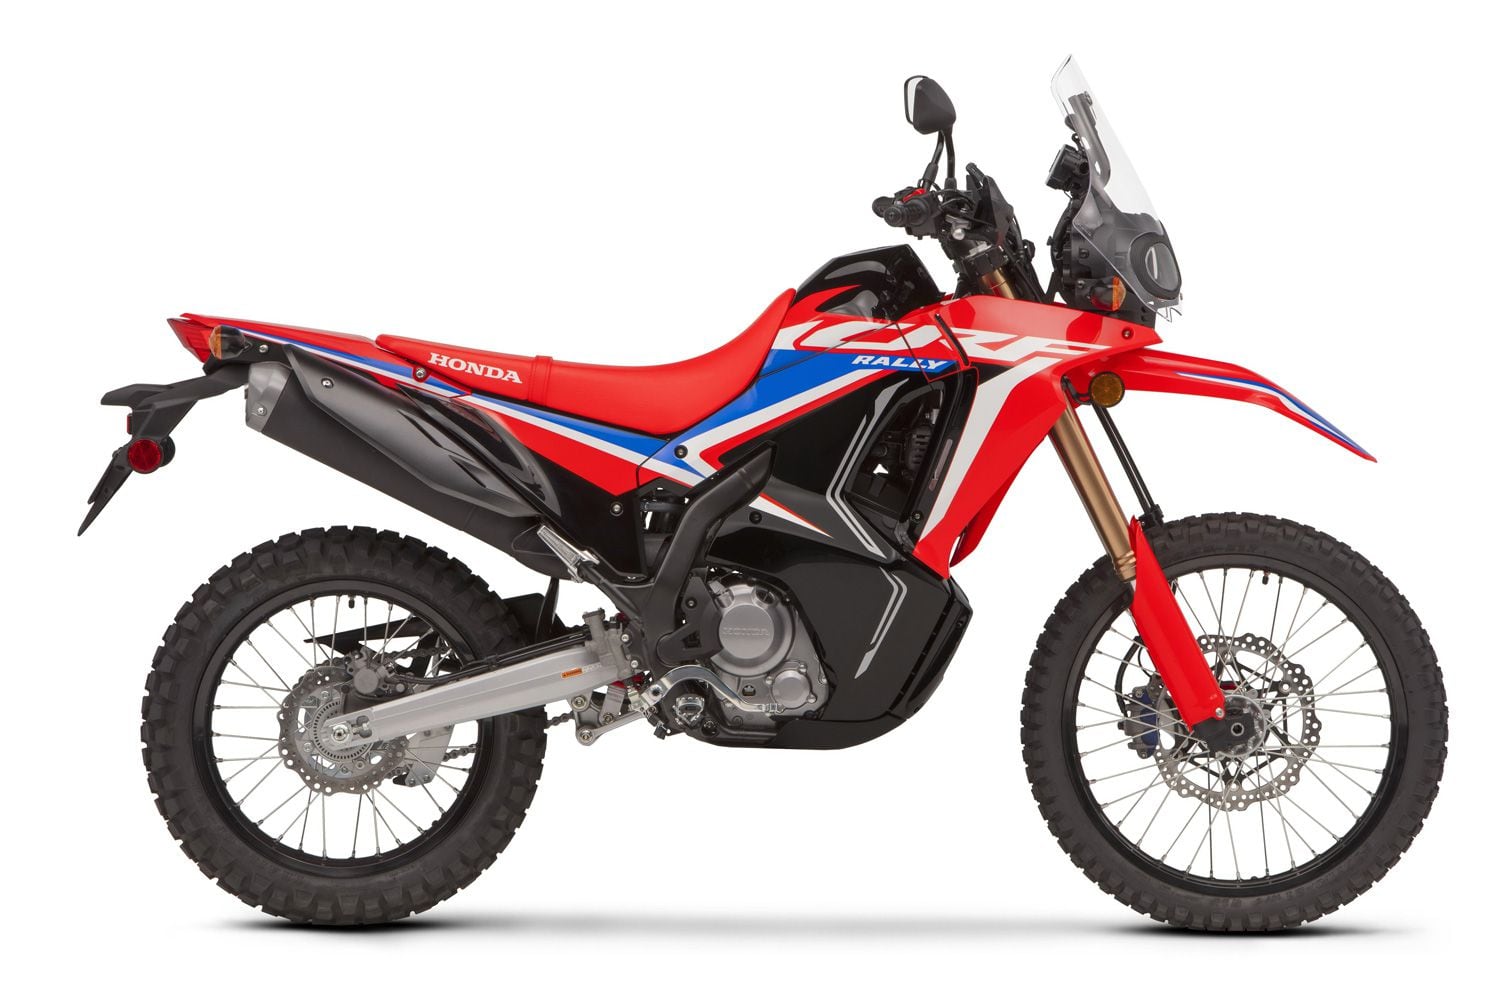 The CRF300L Rally shares much with the CRF300L but gets a rally-inspired fairing and larger fuel tank.